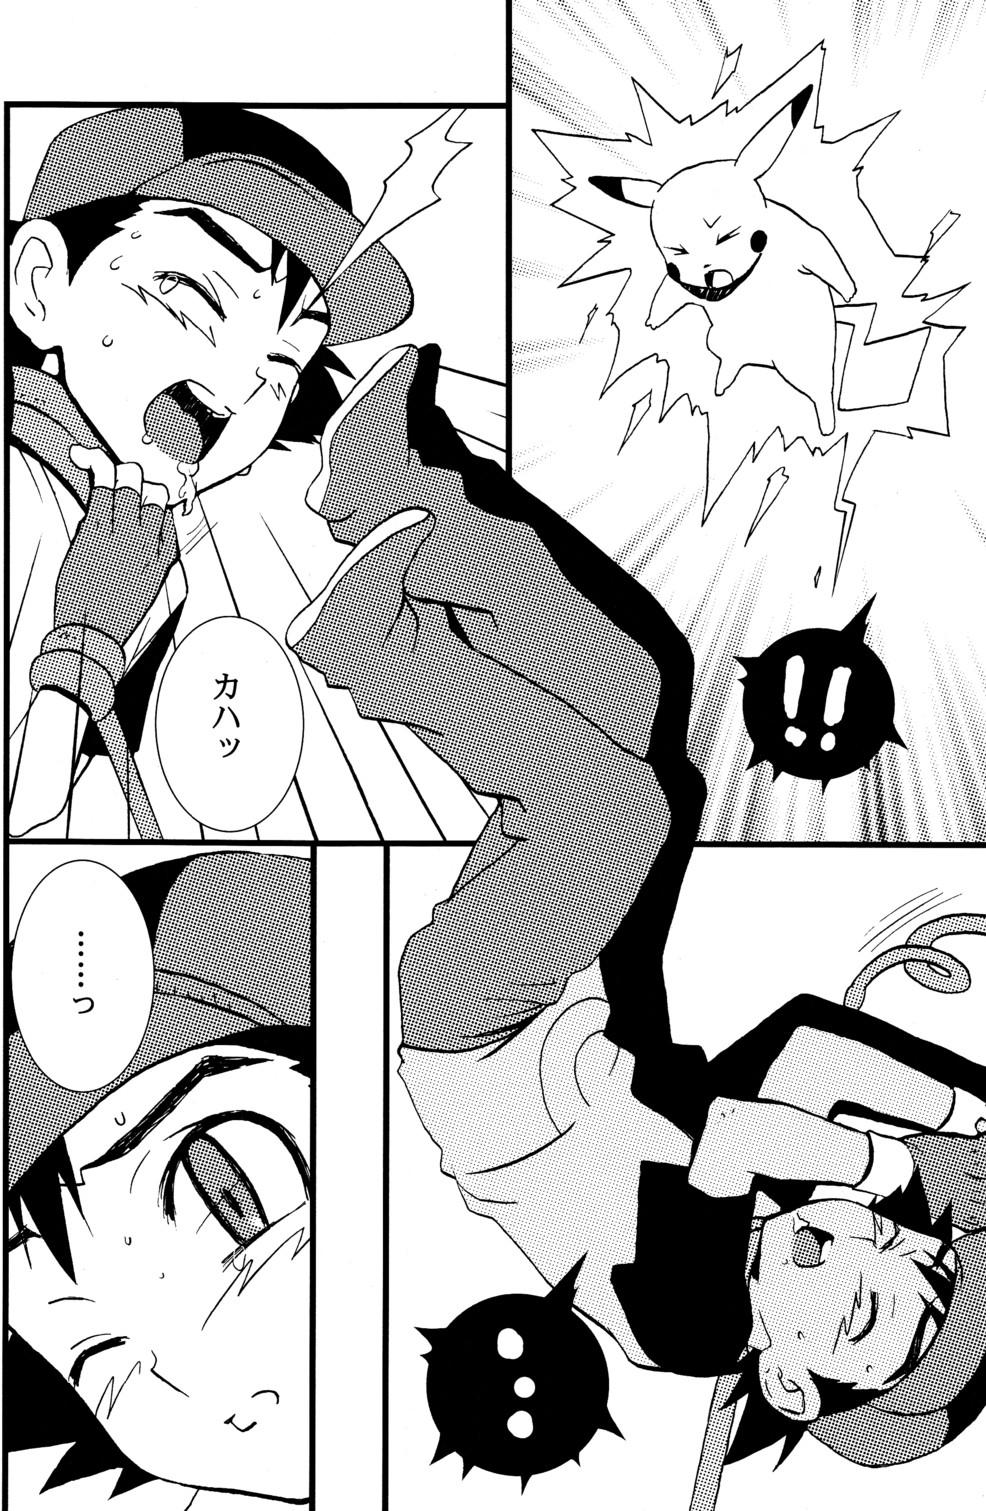 Oral Pocketful of Rainbows - Pokemon Hot Girls Getting Fucked - Page 7